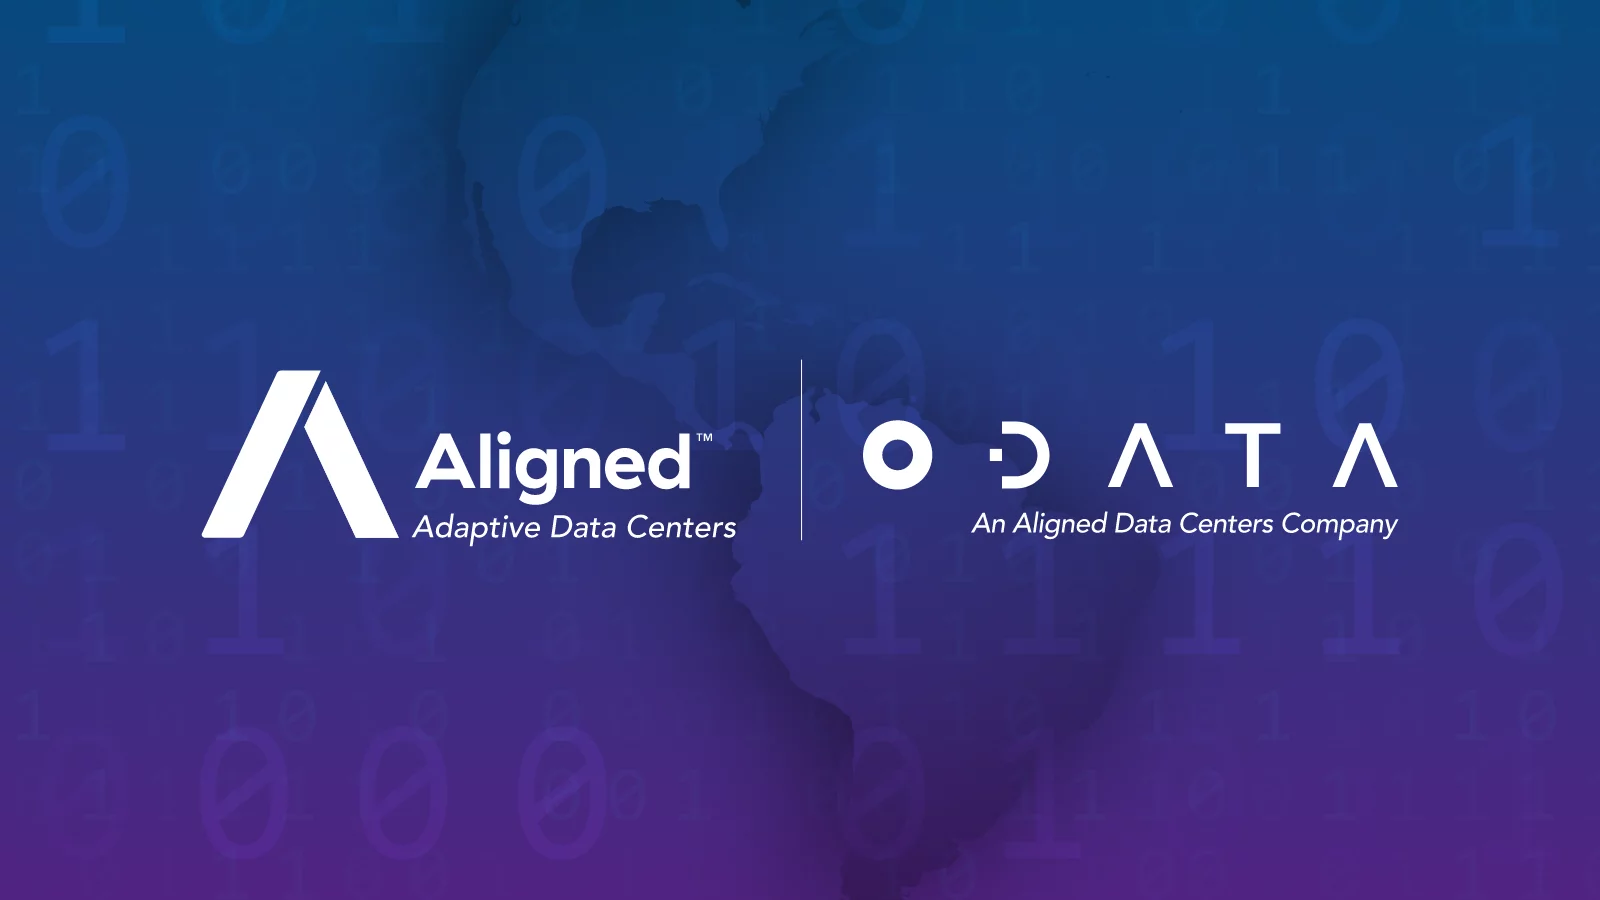 Aligned Data Centers - ODATA An Aligned Data Centers Company - Banner